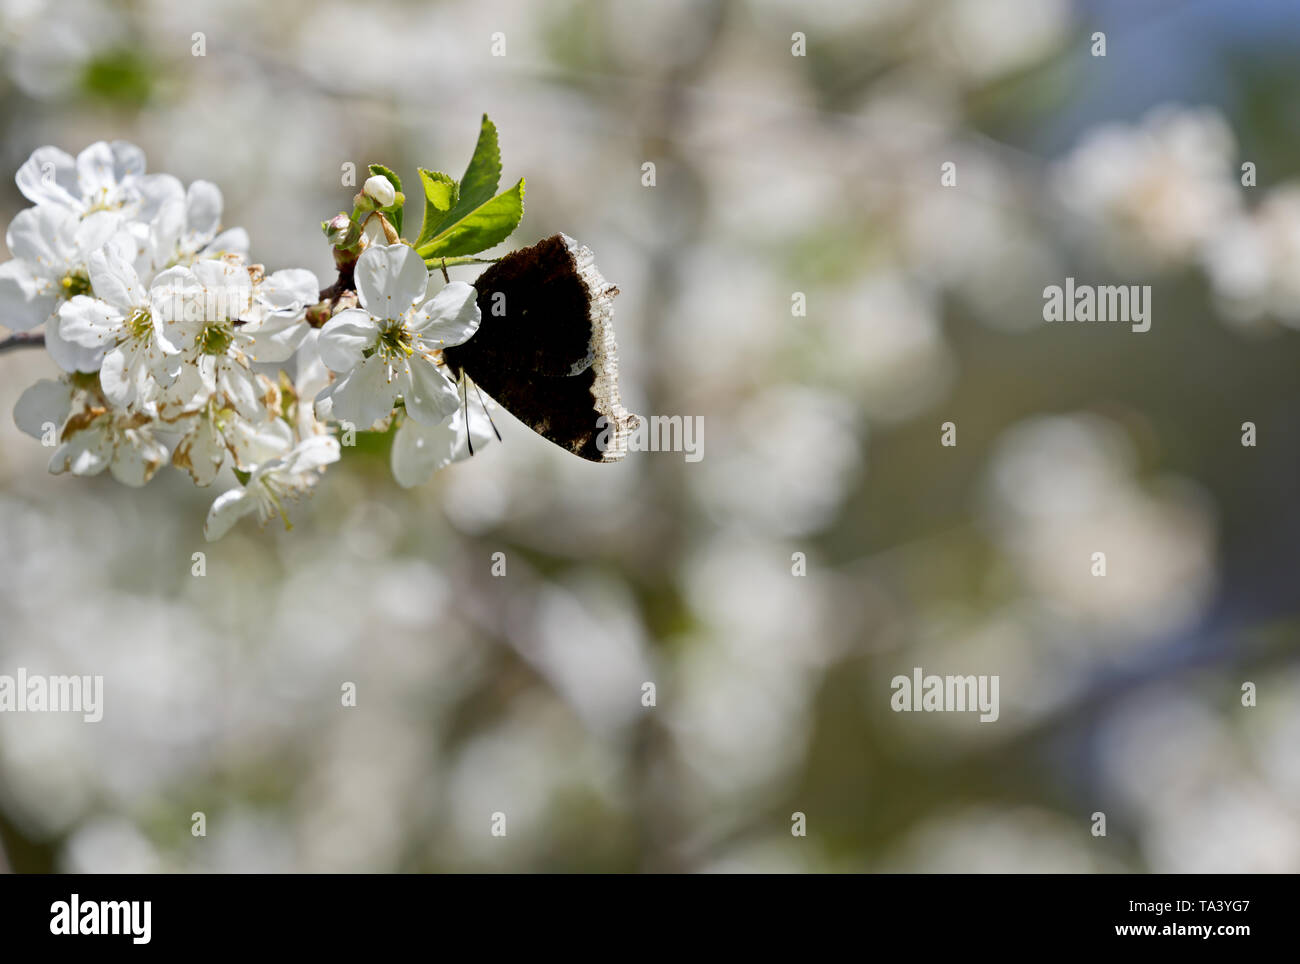 Nymphalis antiopa (Mourning Cloak or Camberwell beauty) on a beautiful  cherry branch in spring Stock Photo